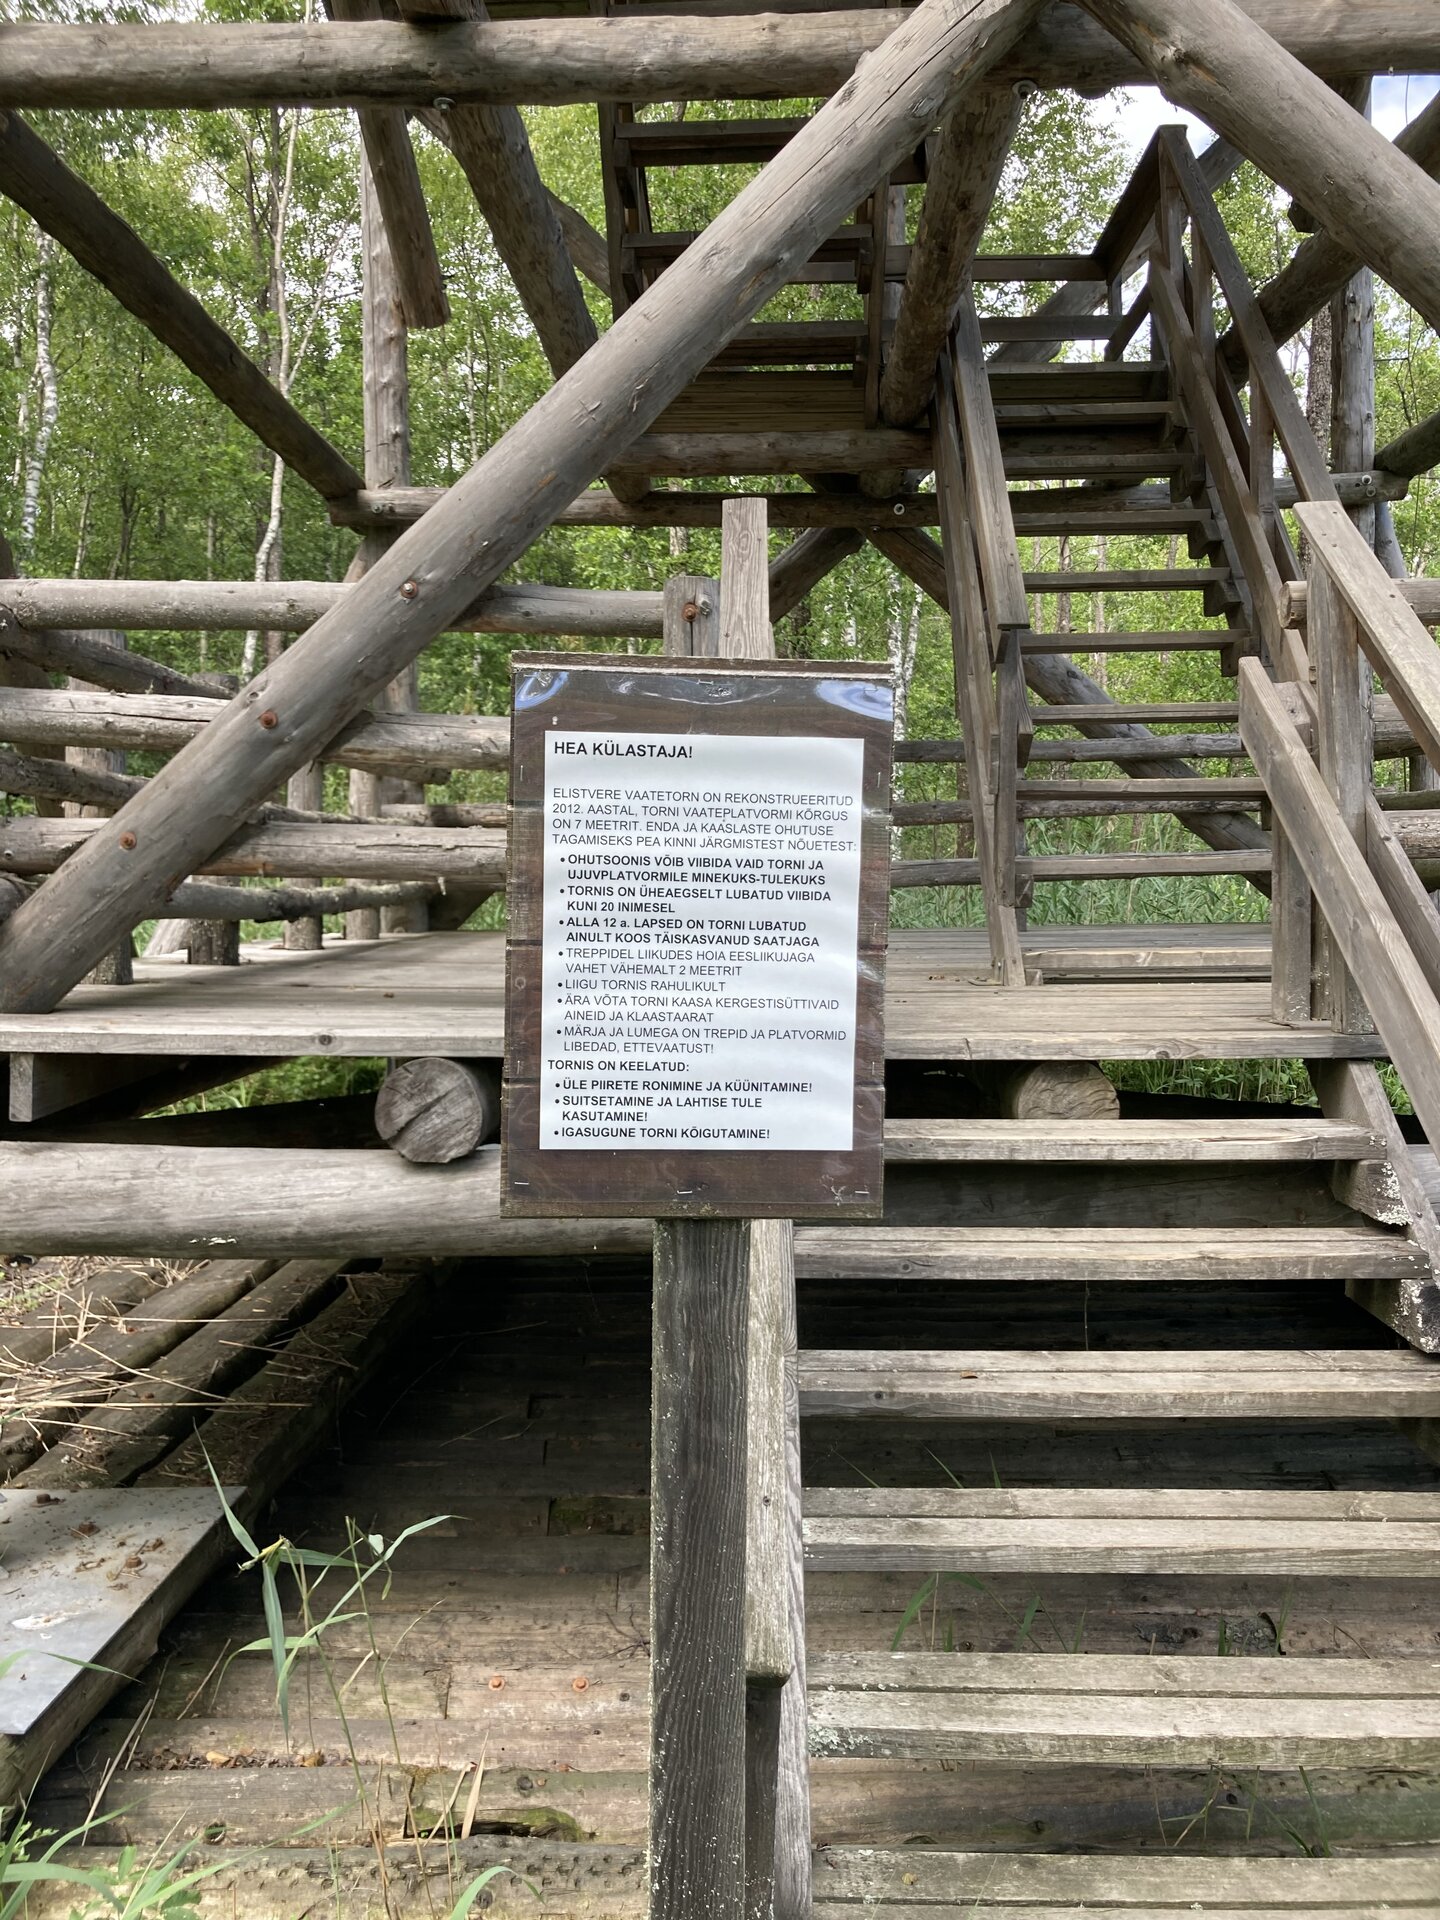 Observation tower at the lake